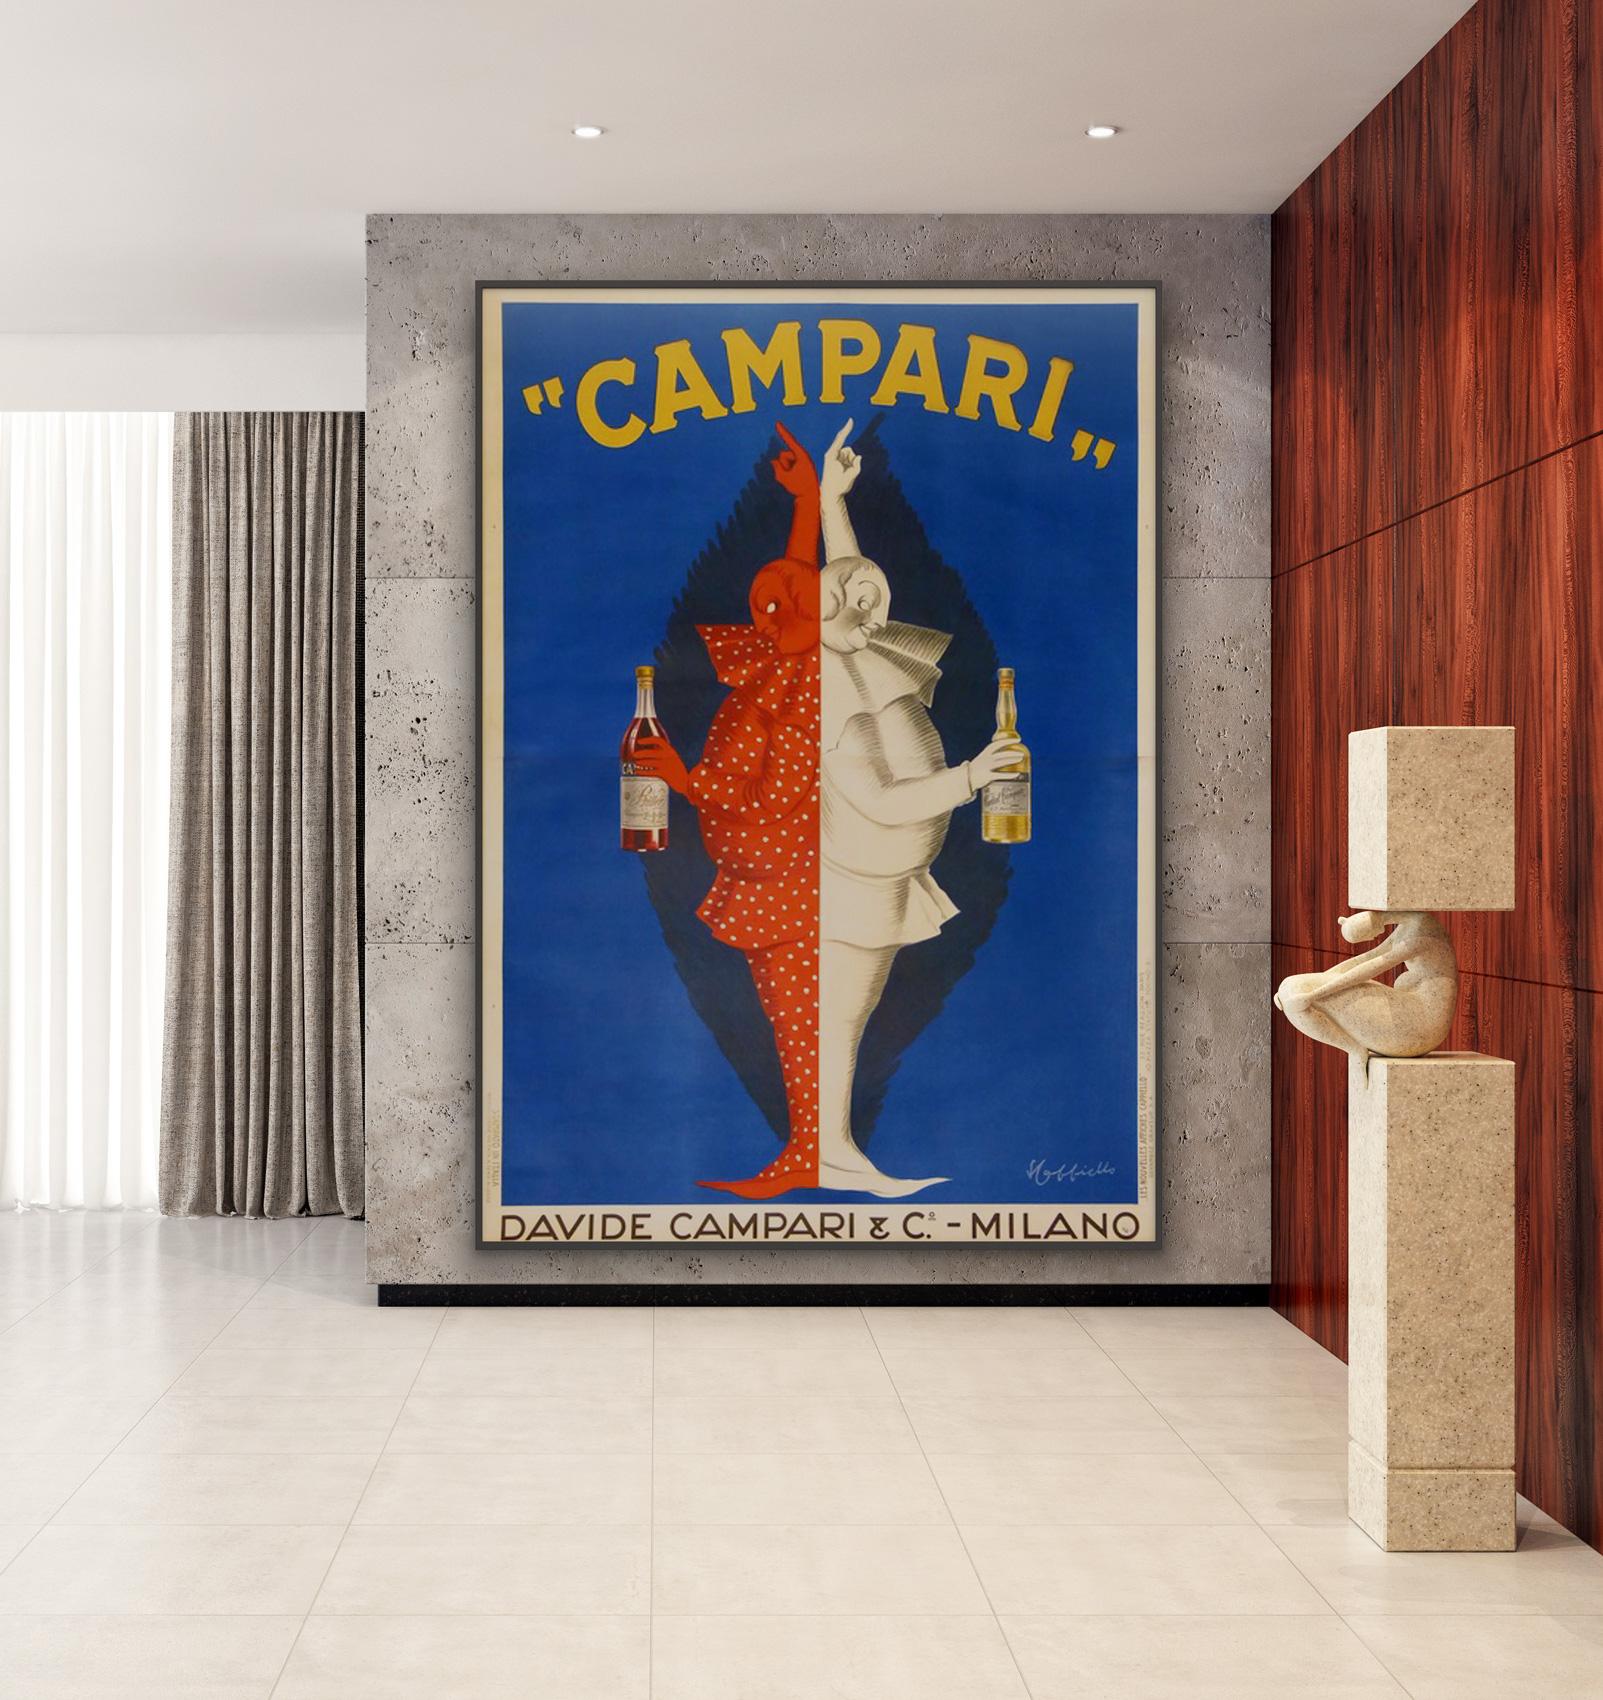 Fabulous supersized vintage Italian advertising poster from circa 1922 for Campari. We love the striking design by Leonetto Cappiello which delivers maximum impact on this huge poster. Very rare, wonderful item.

Leonetto Cappiello (1875–1942) was